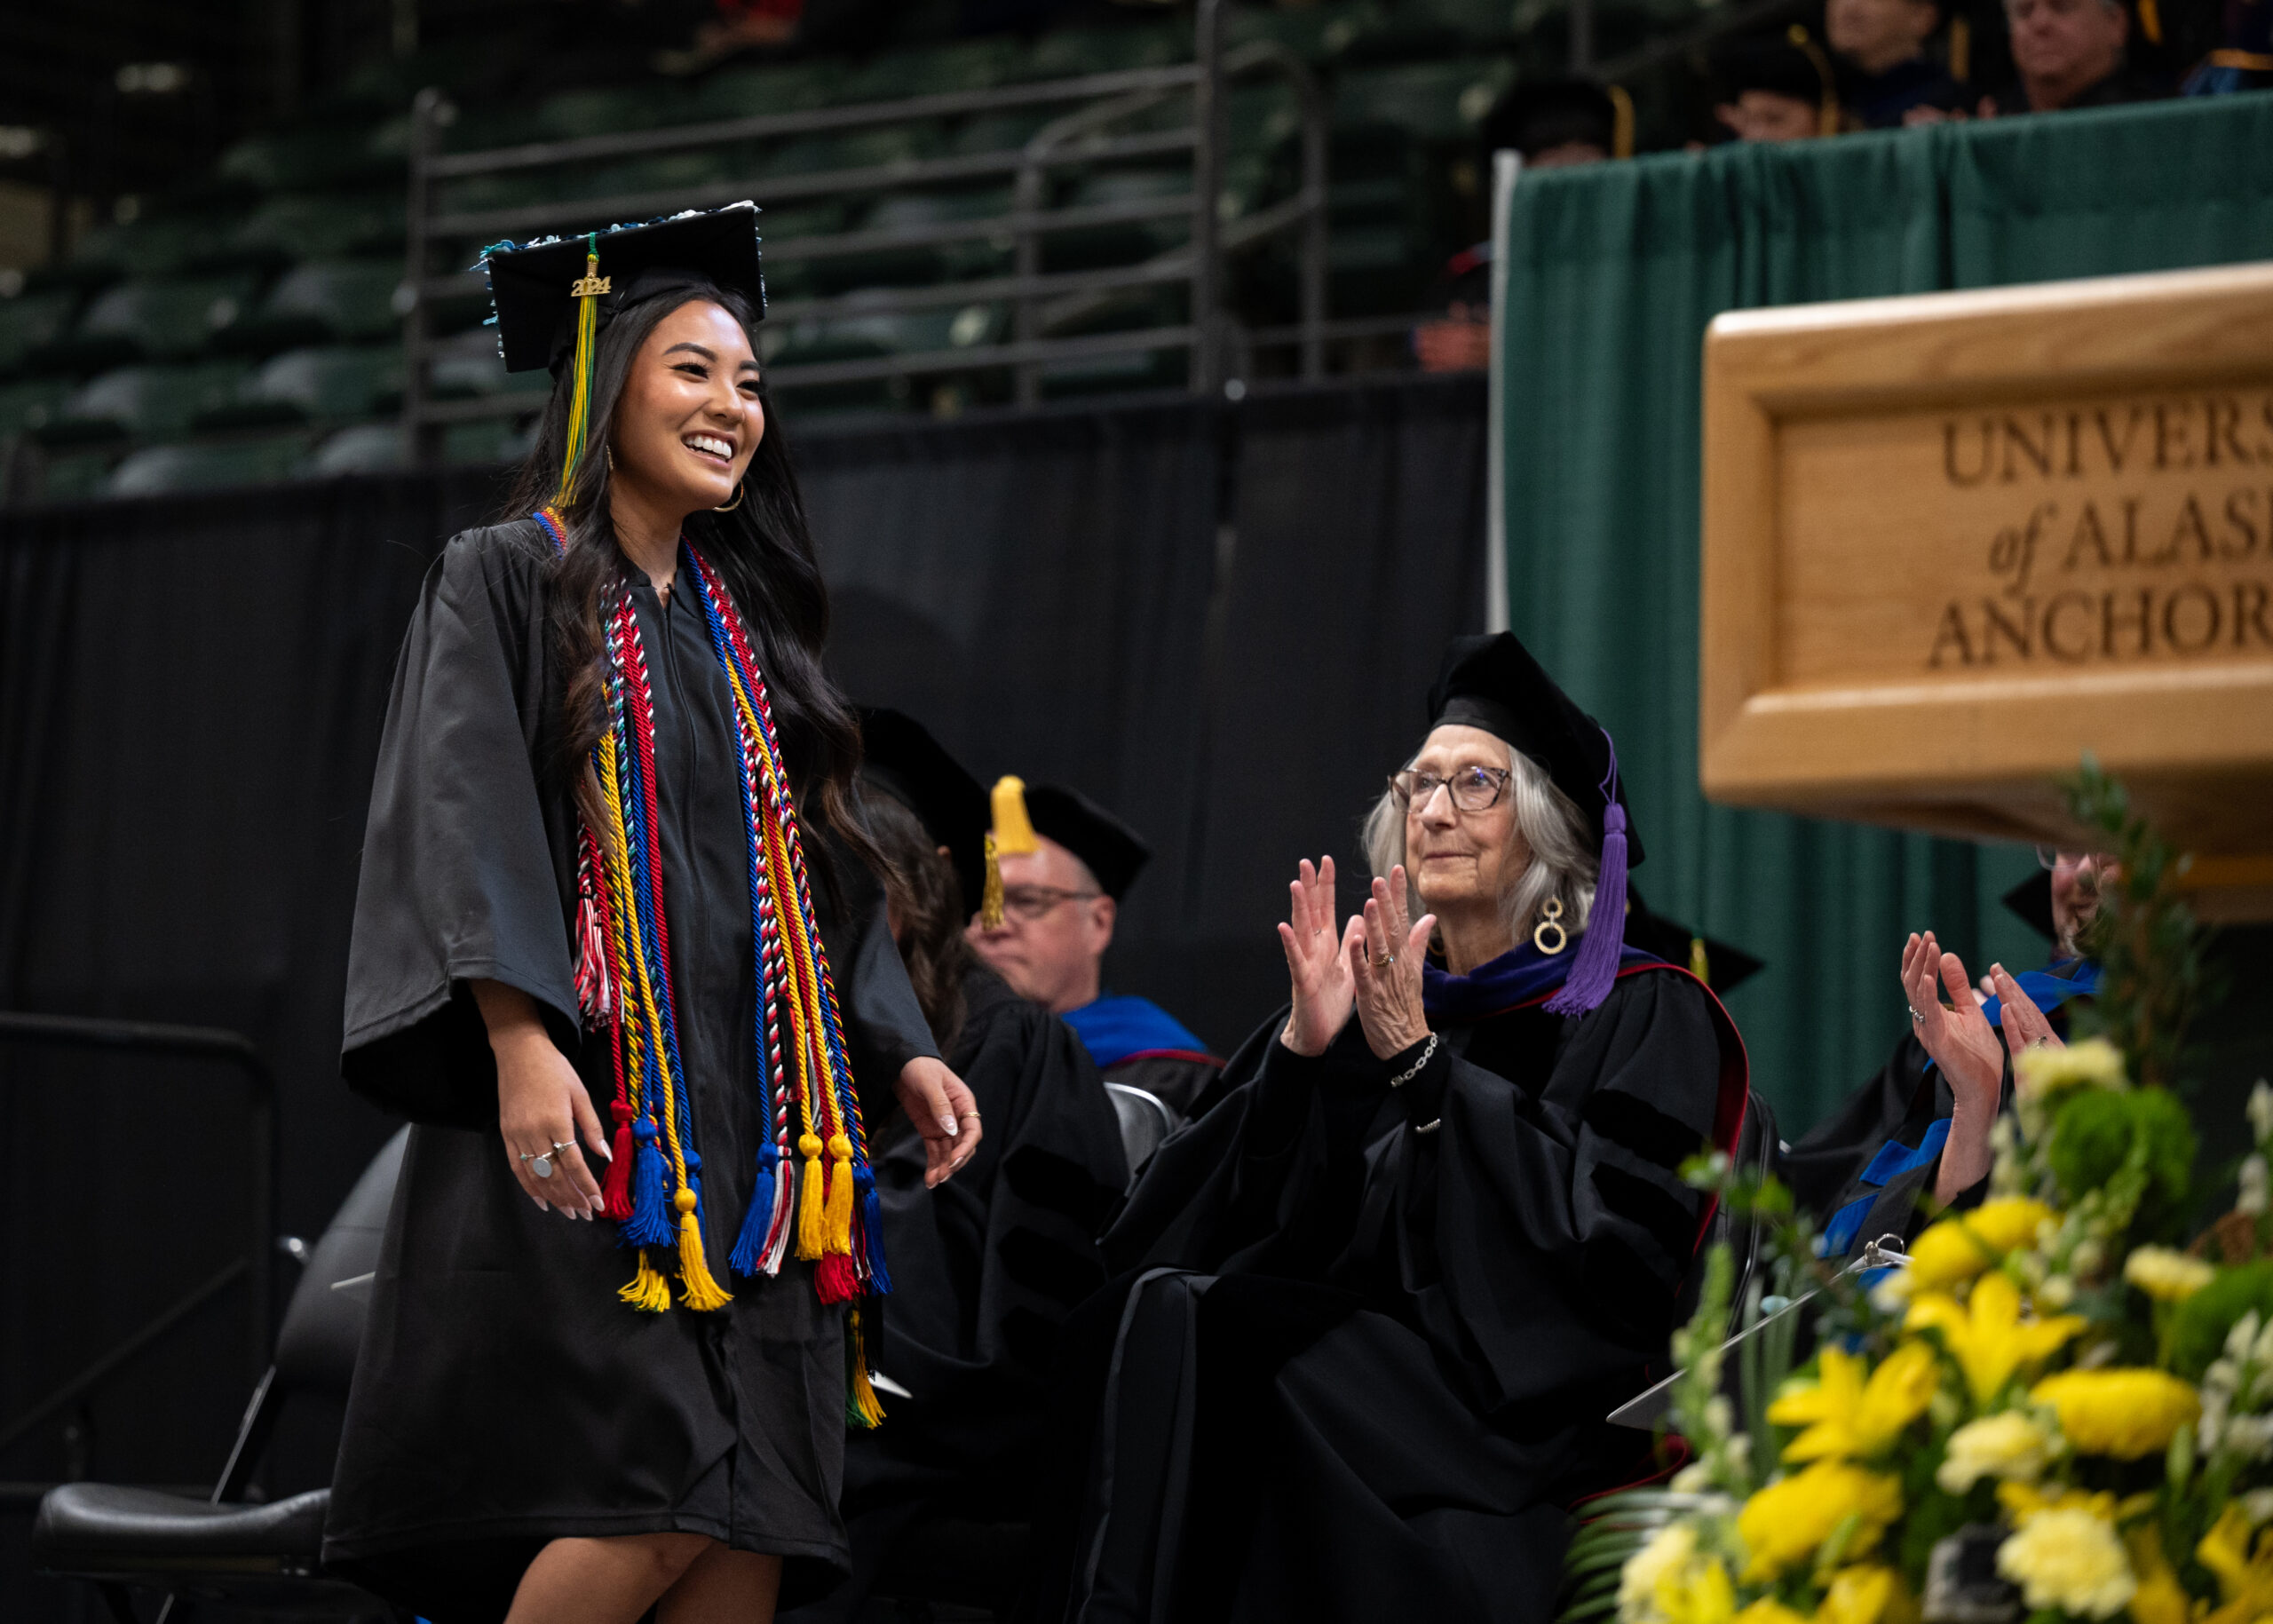 A woman in a black graduation gown walks up to a podium.